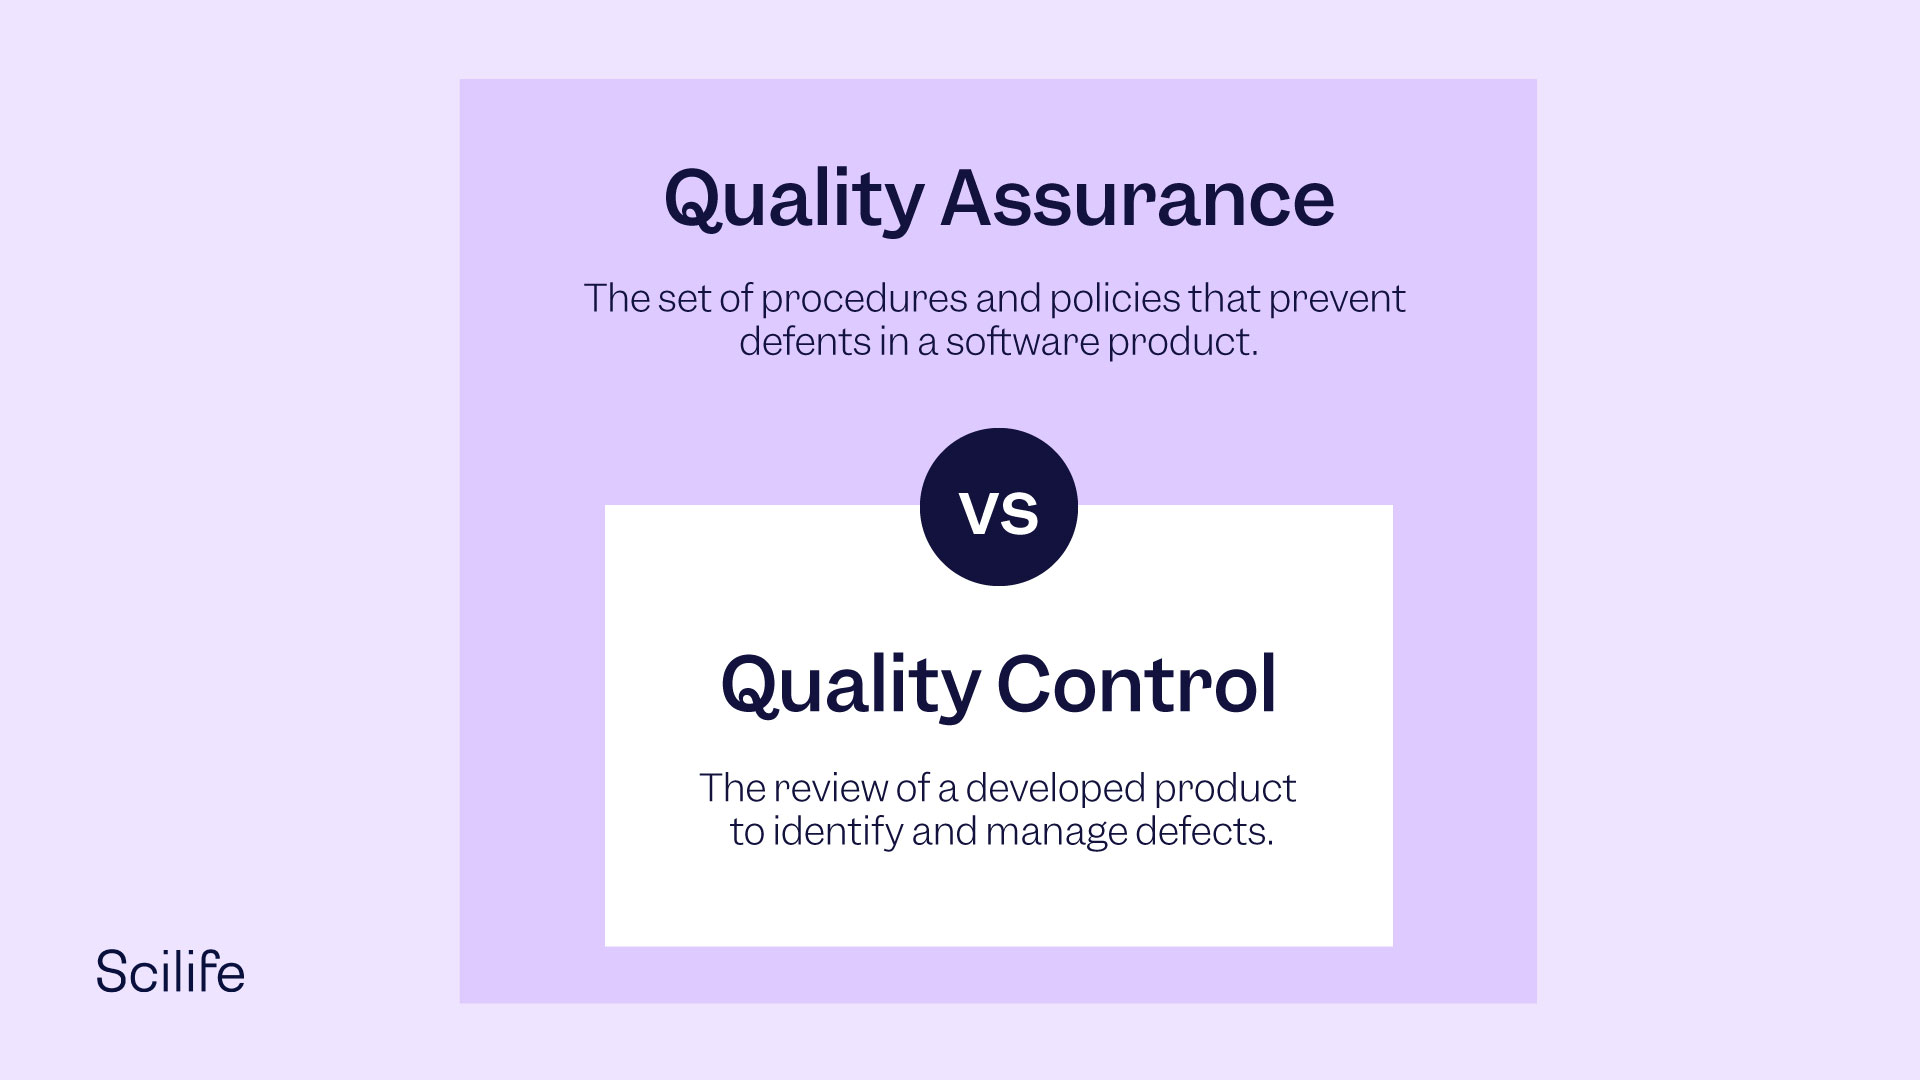 Illustration which represents quality assurance (QA) vs quality control  (QC) by Scilife.